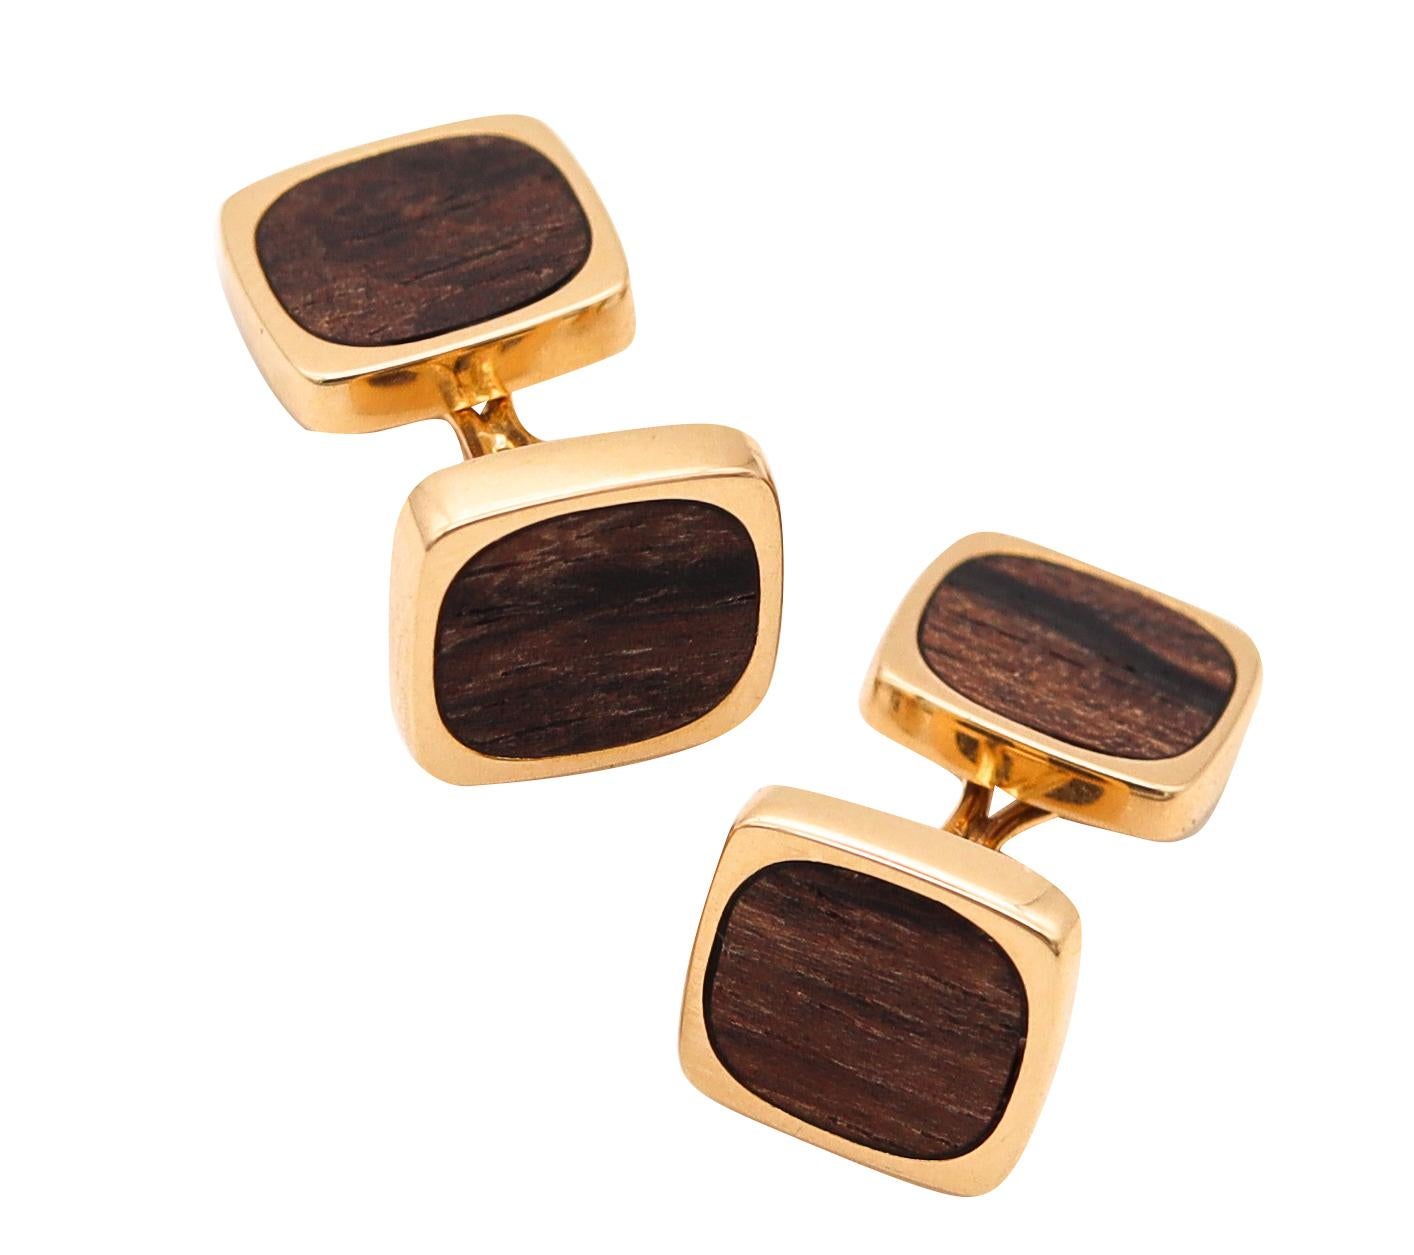 A pair of cufflinks designed by Dinh Van.

Beautiful pair, created in Paris France by the master jewelry designer Jean Dinh Van, back in the 1970's. These iconic cufflinks was crafted in solid yellow gold of 18 karats, with high polish finish. They